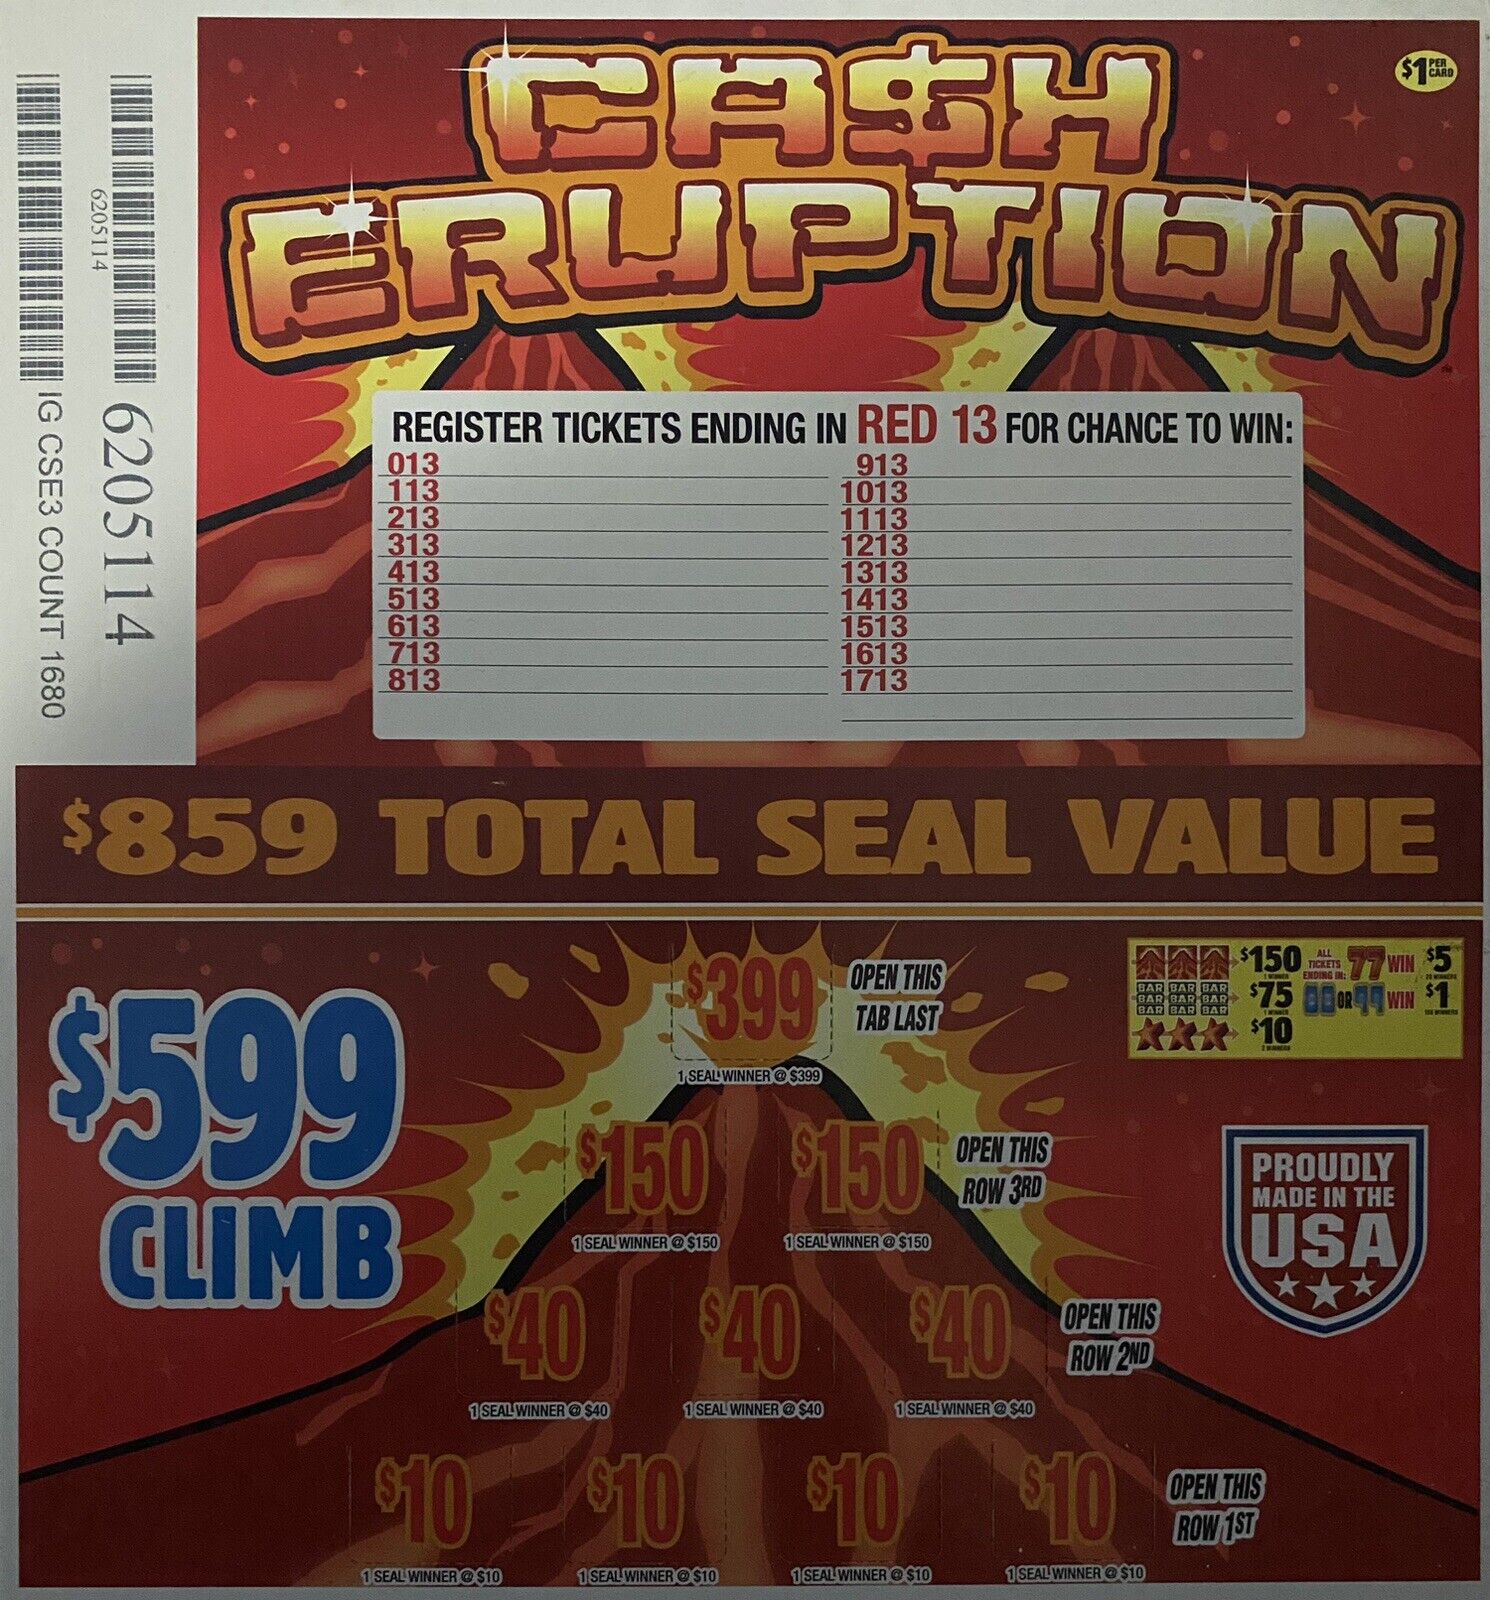 New Bingo Pull Tickets Cash Eruption & Bet The Max Seal Card